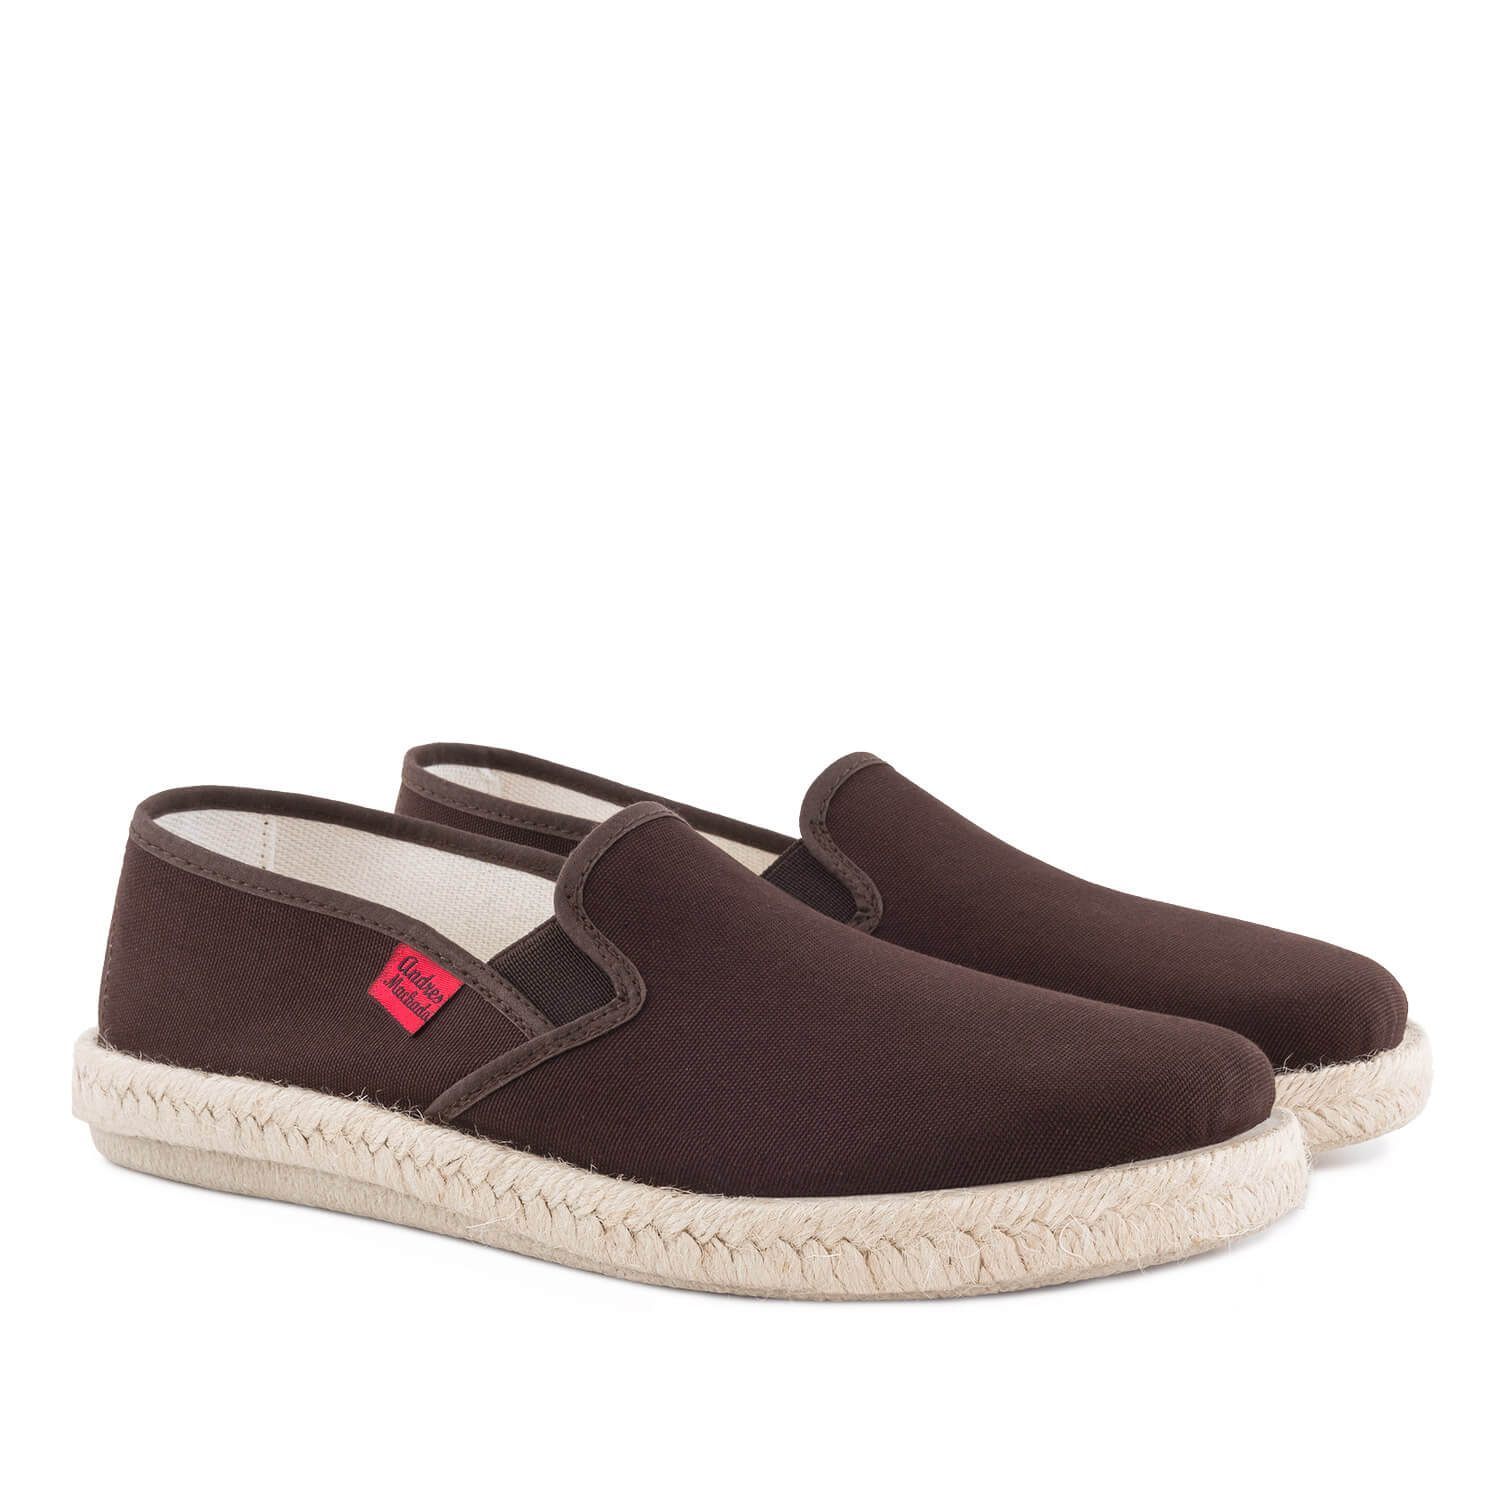 Mythical Brown Canvas Slip-On Shoes with Rubber and Jute Sole 